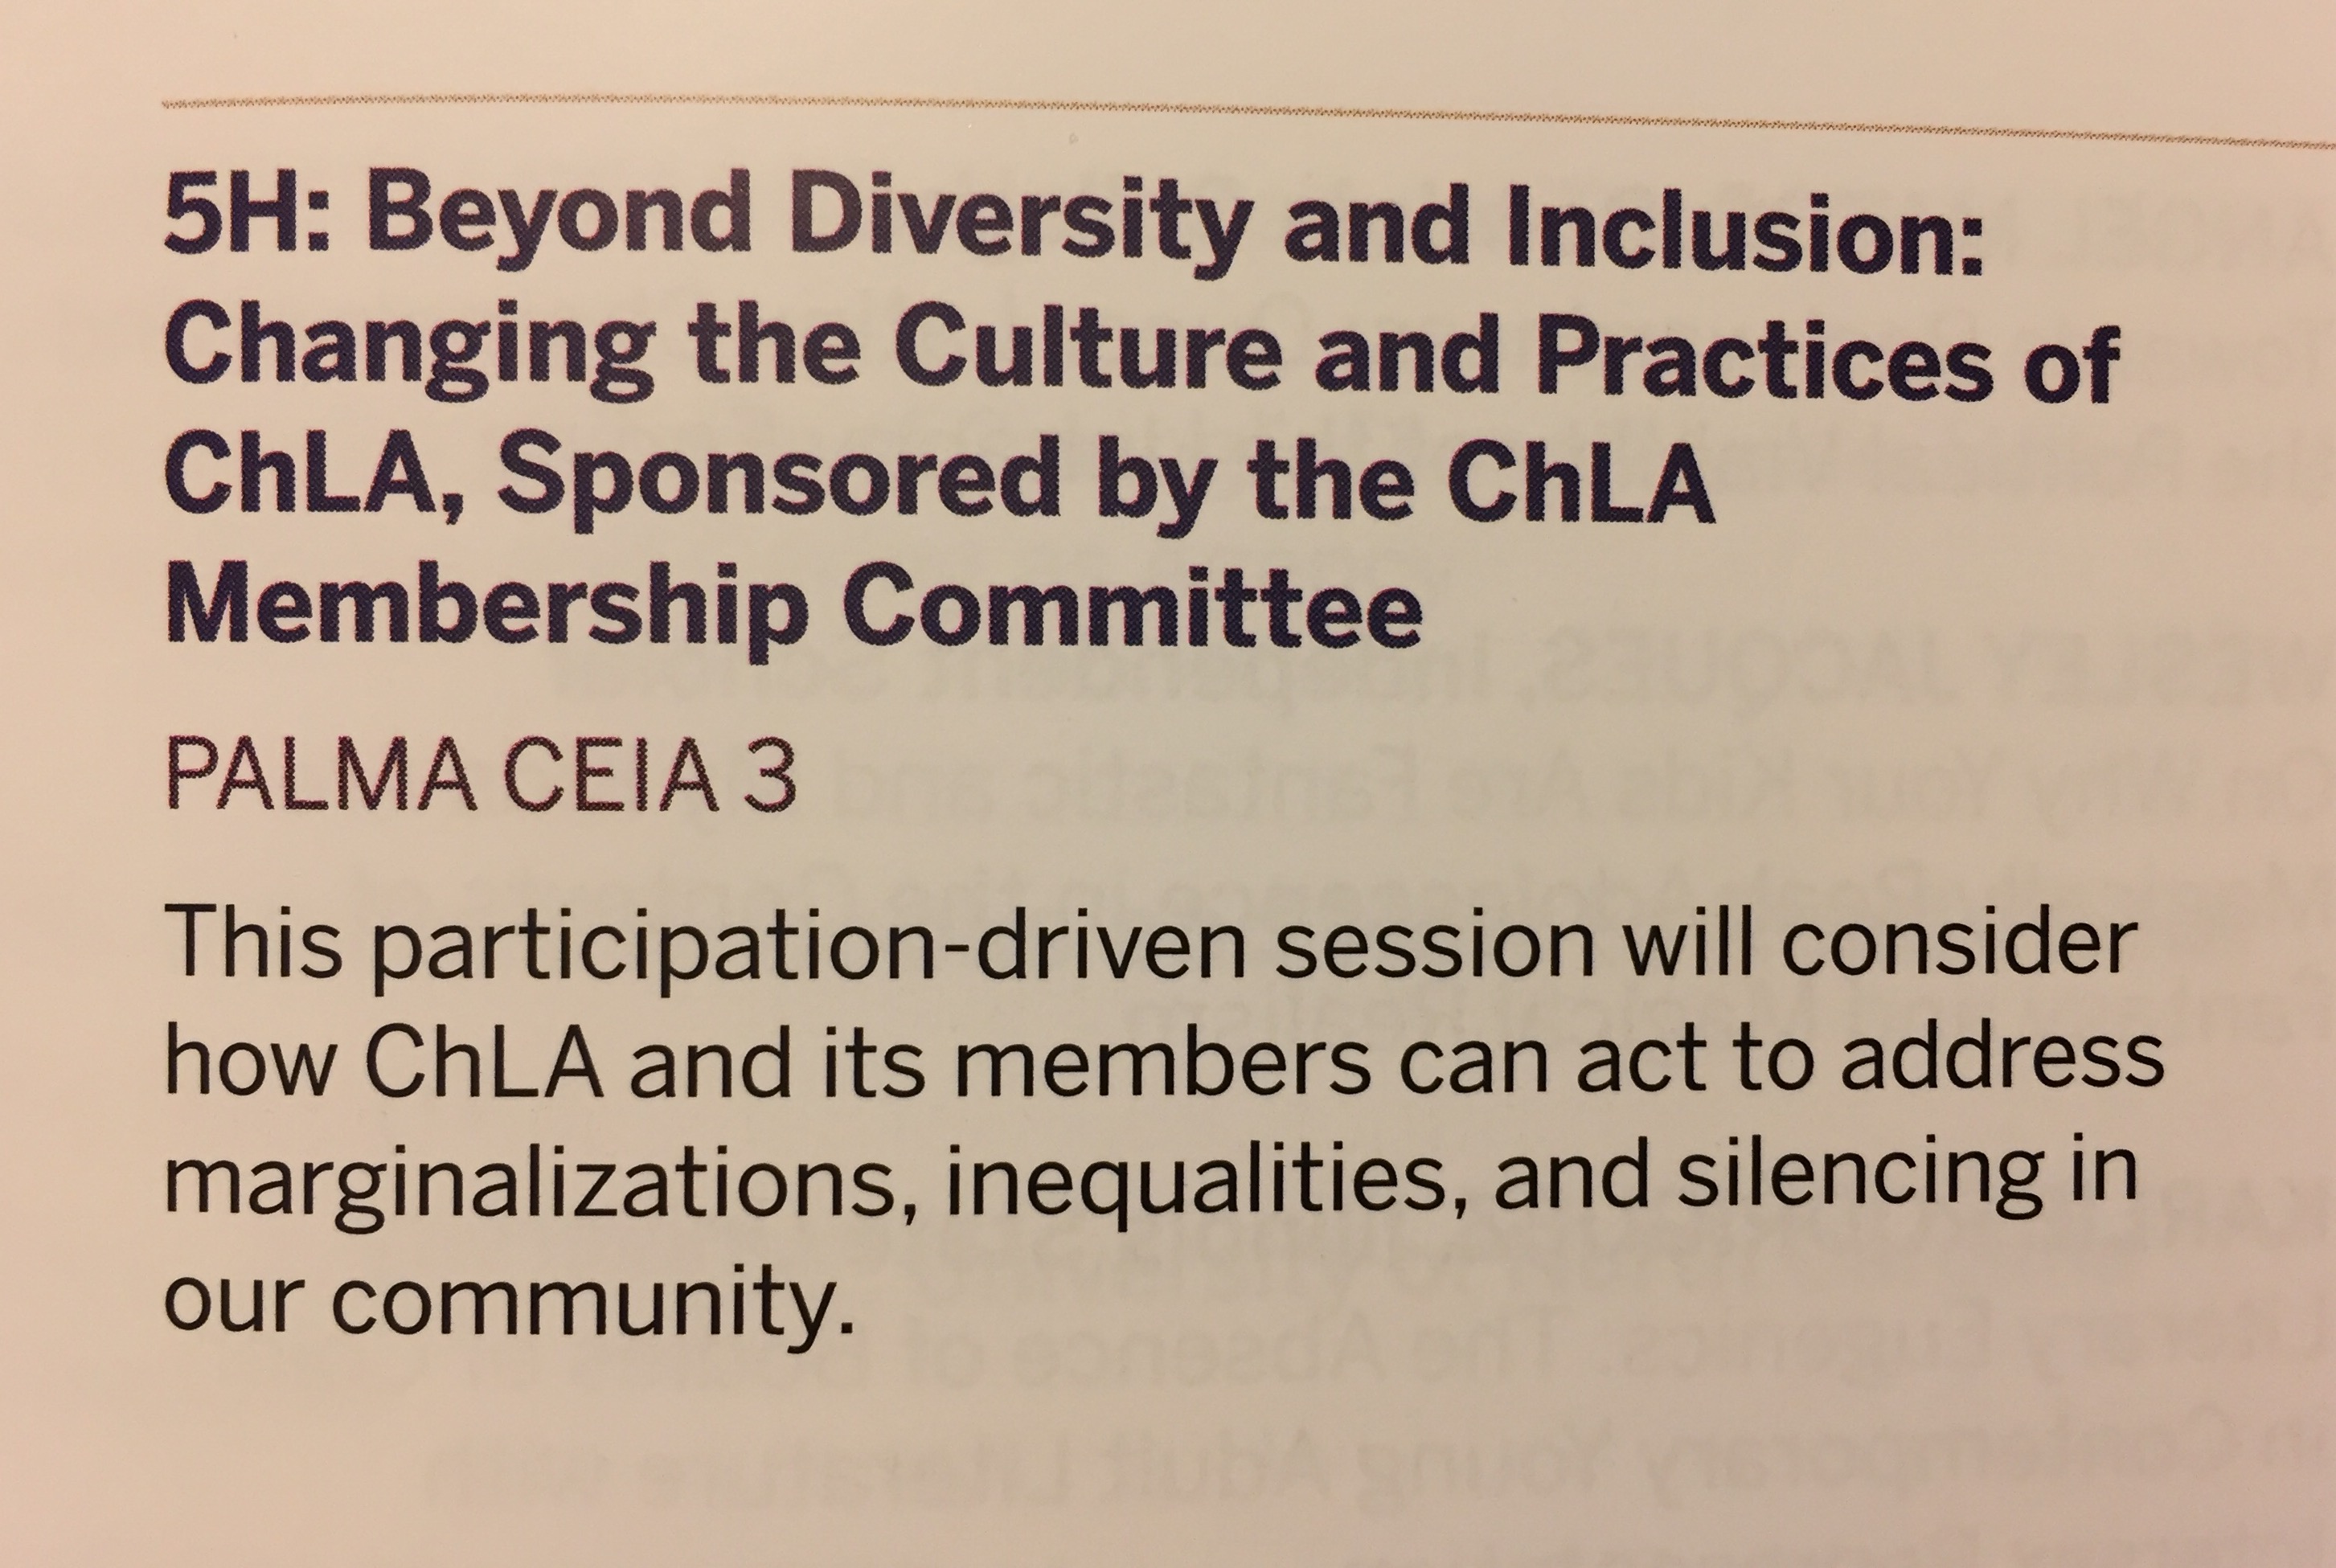 Beyond Diversity and Inclusion: Changing the Culture and Practices of the ChLA